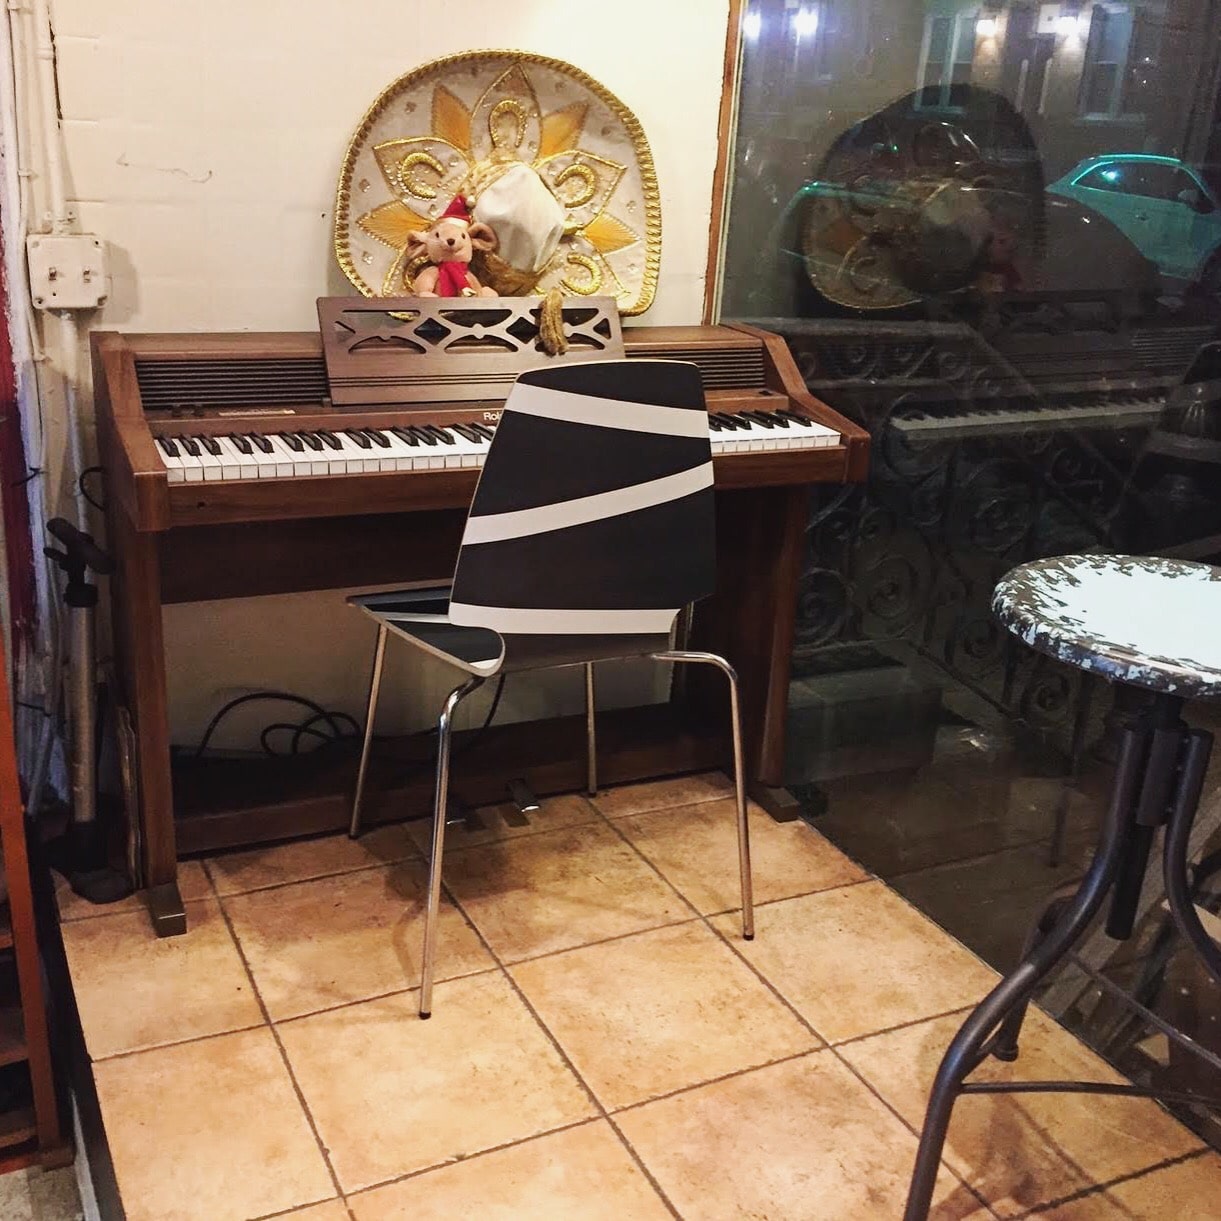 ds soul full cafe piano